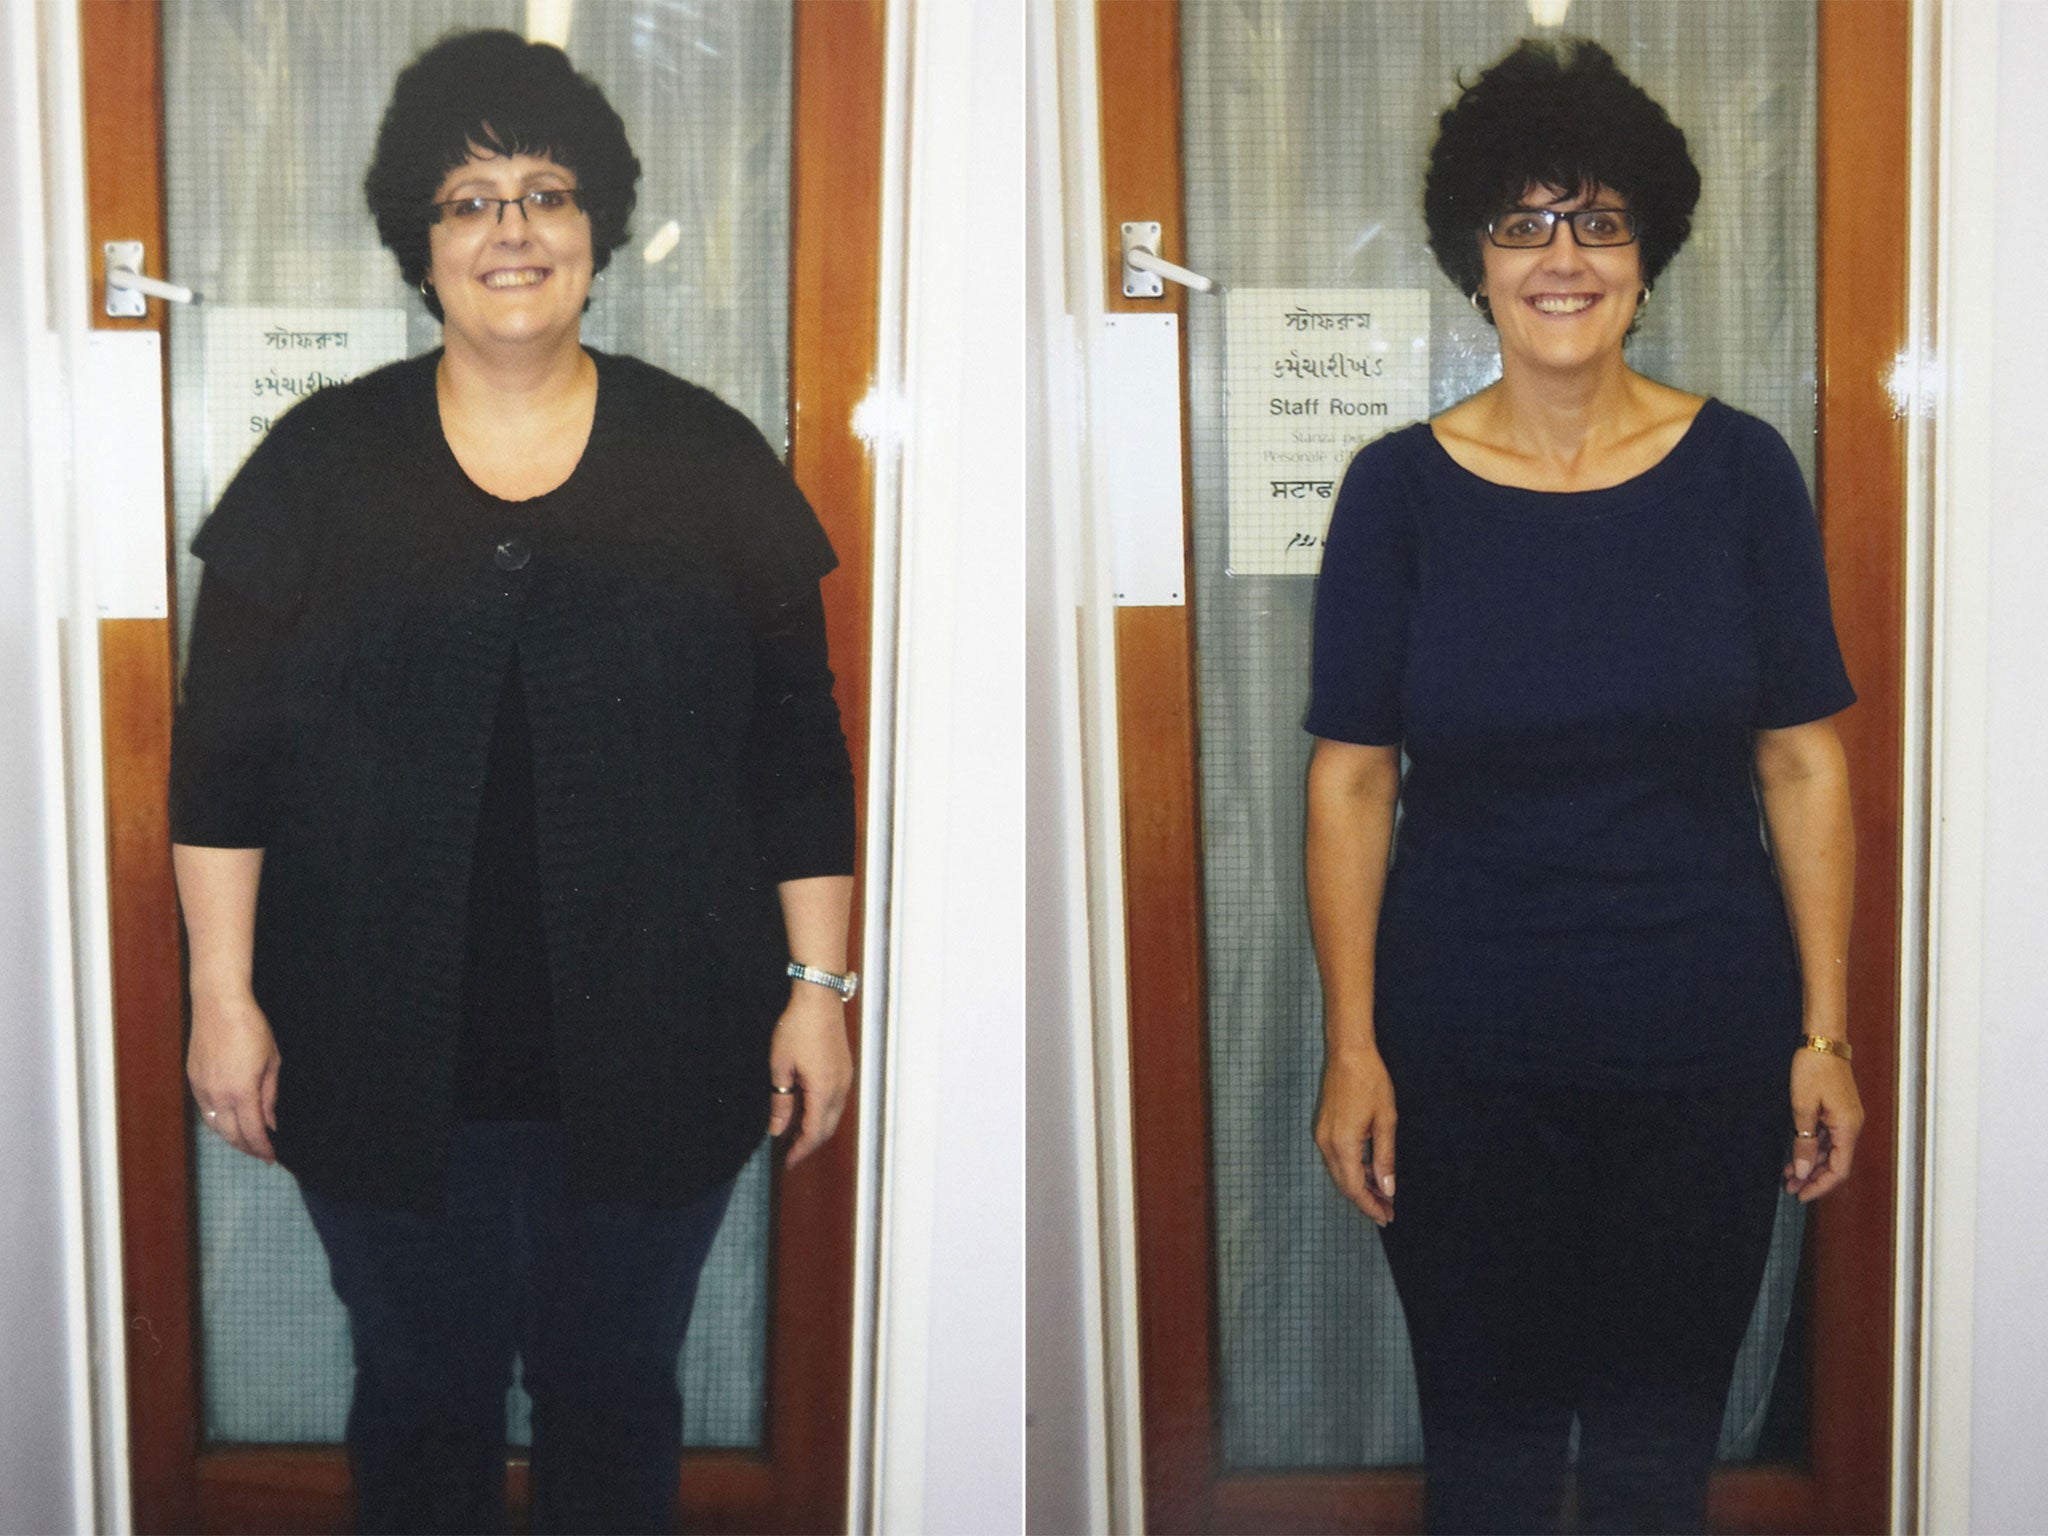 100 Gastric Sleeve Before and After pics, Weight Loss Surgery